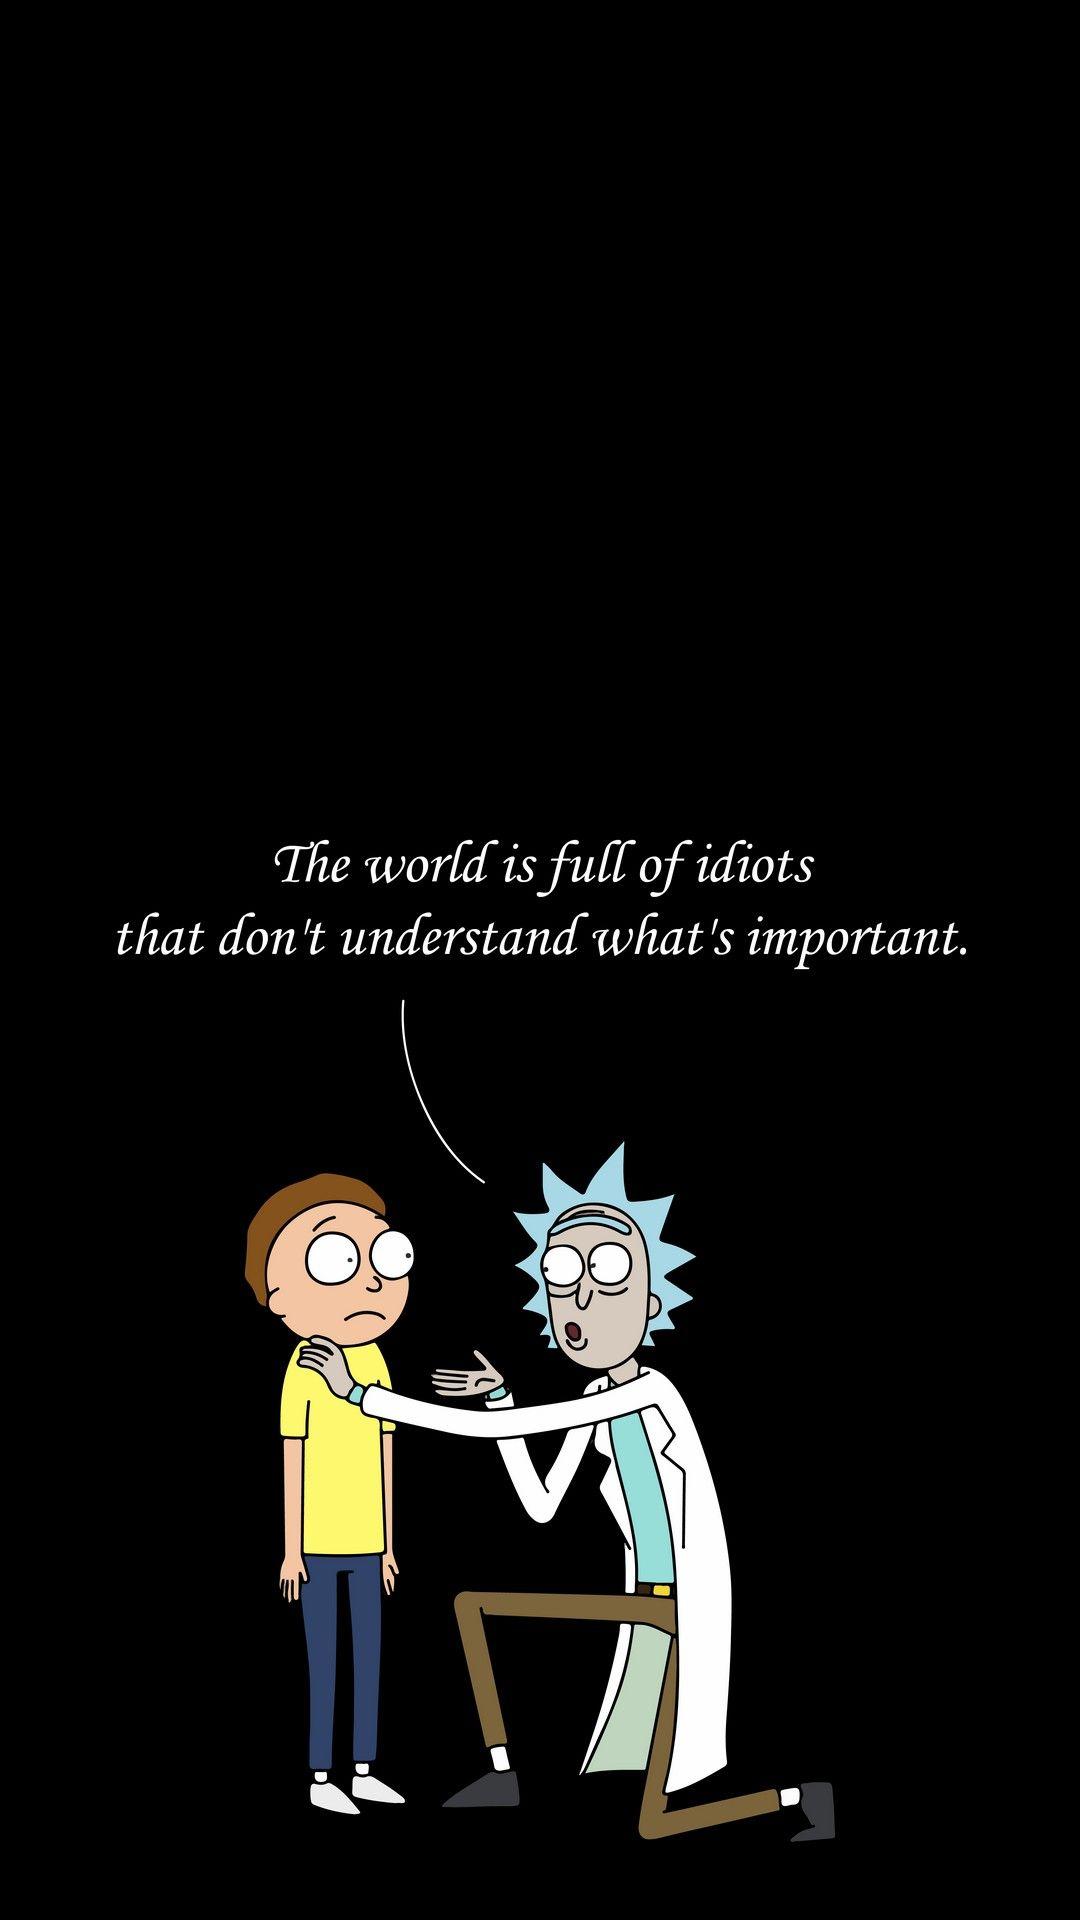 Quotes Wallpaper Rick And Morty iPhone. Rick and Morty